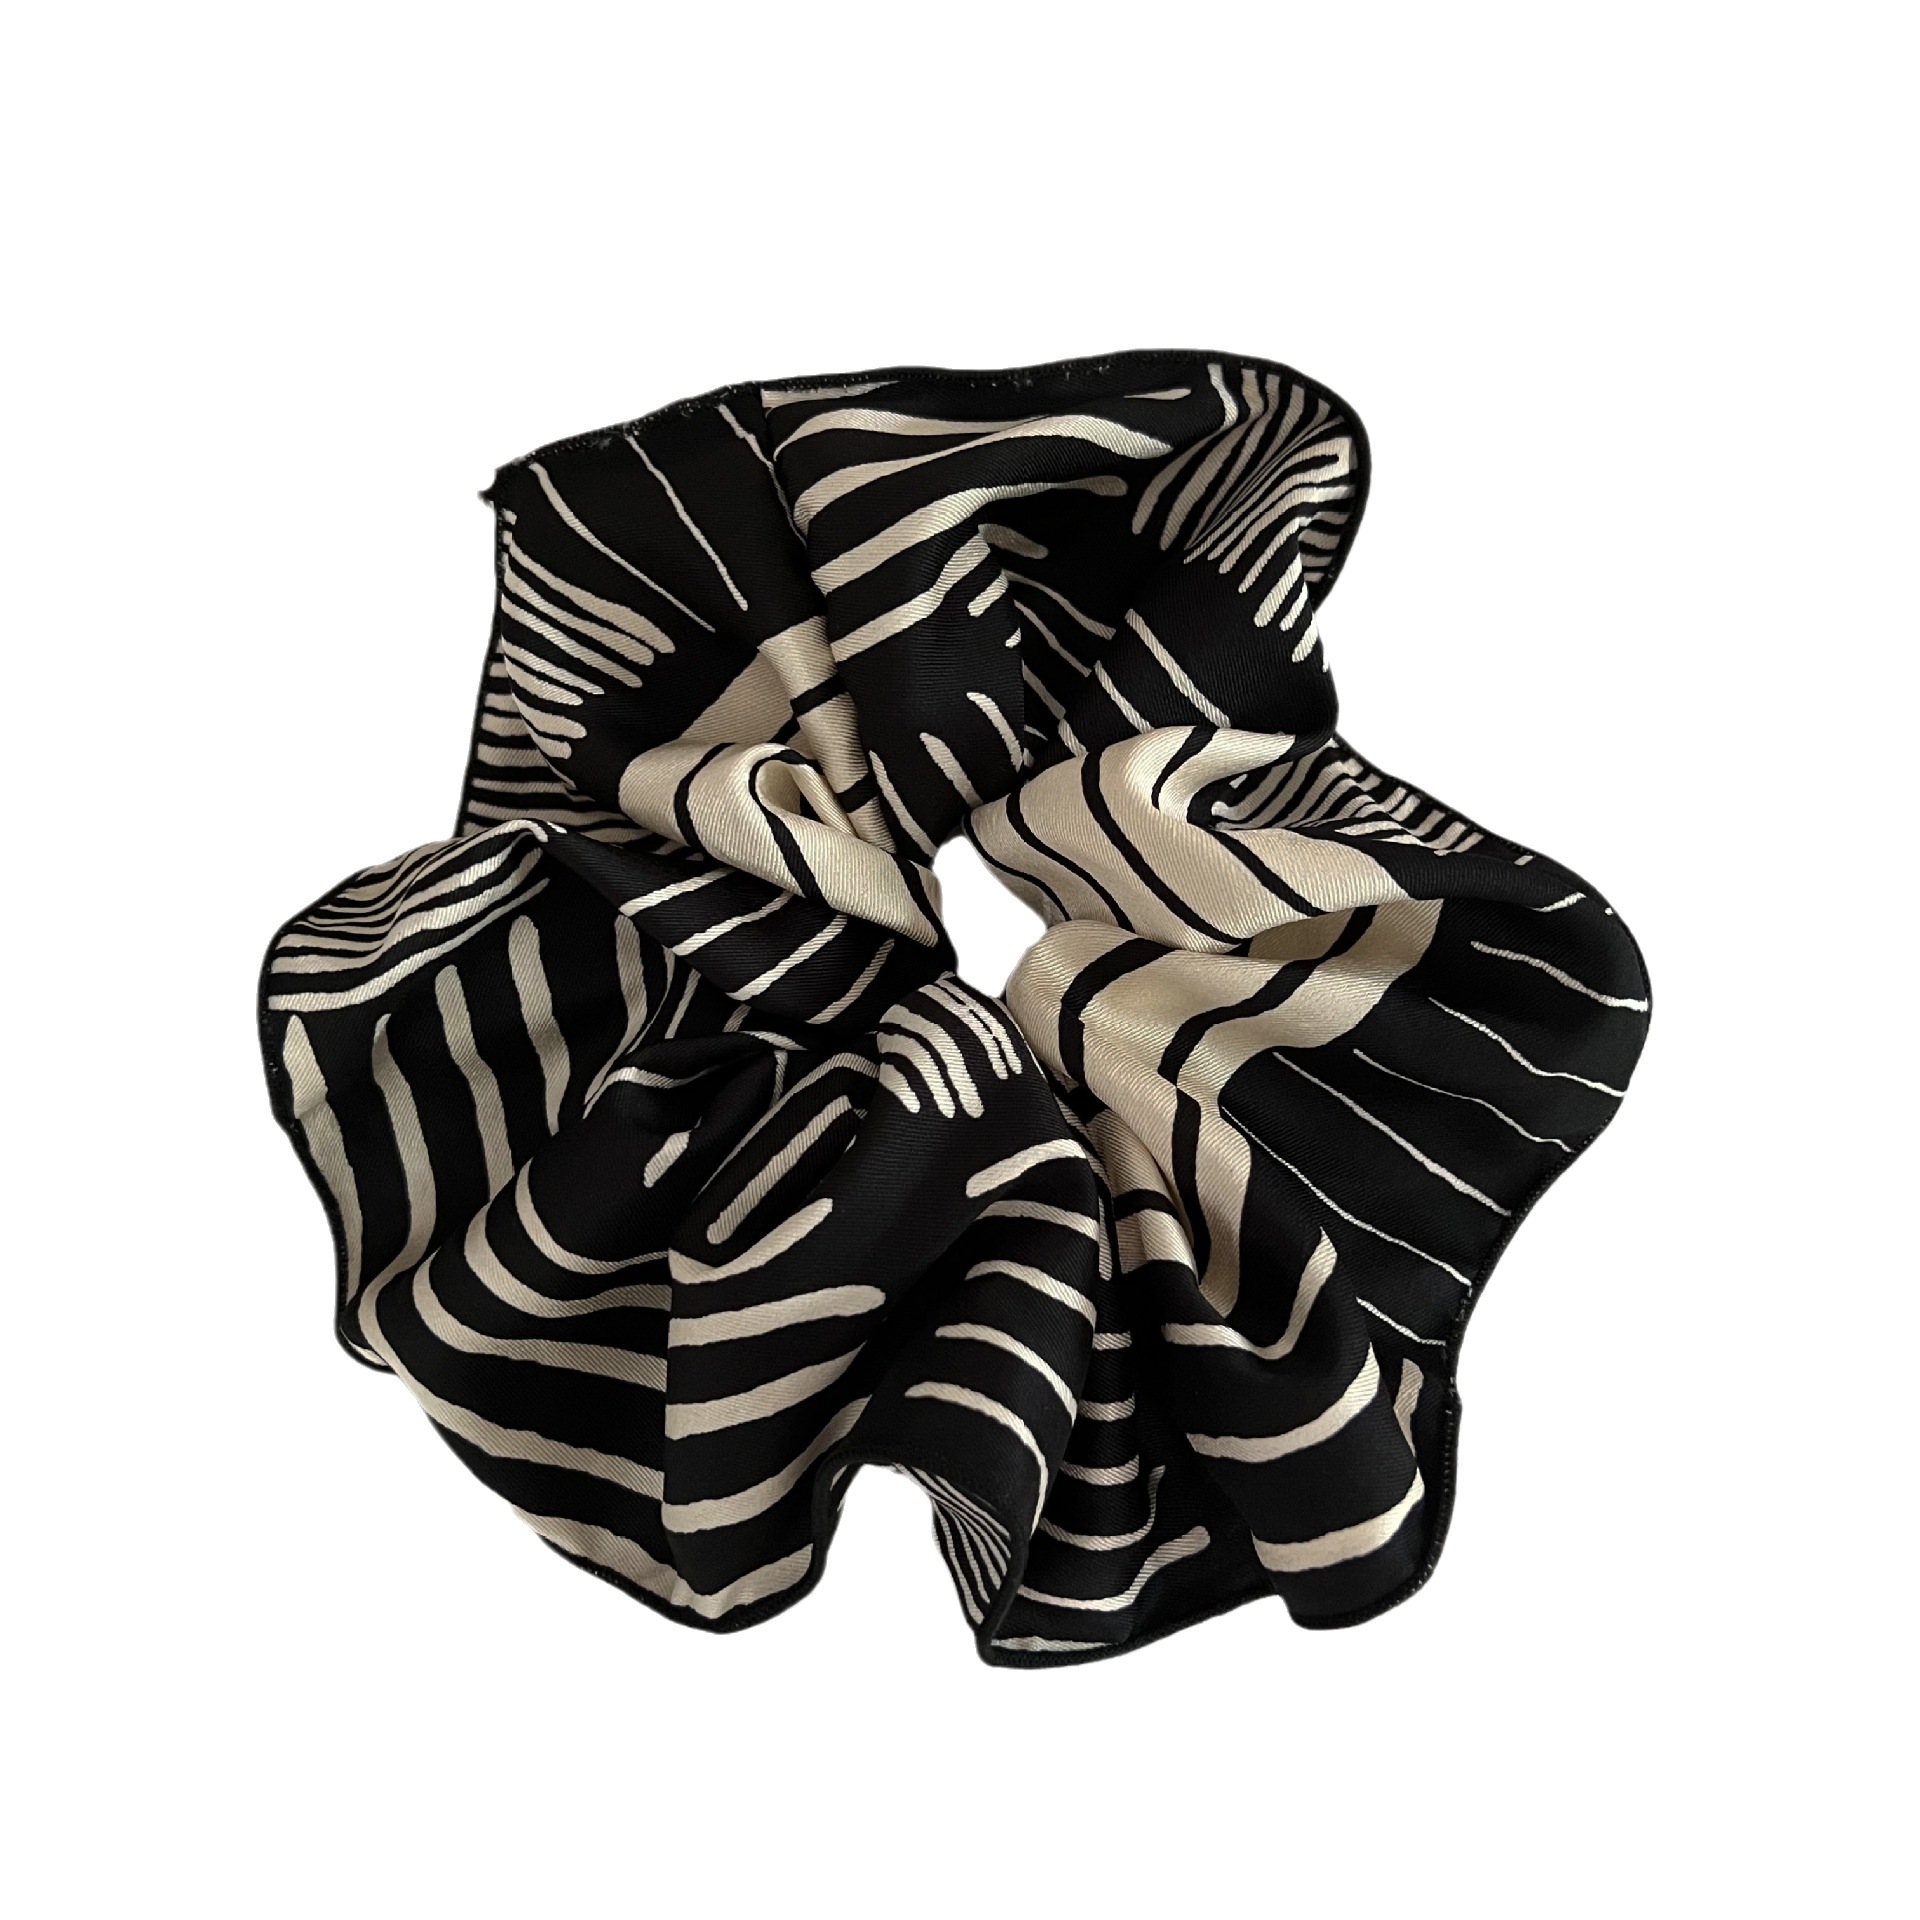 French Simplicity Black and White Striped Large Intestine Hair Band Female New Satin Paisley High-Grade Temperament Hair Accessory for Ponytail